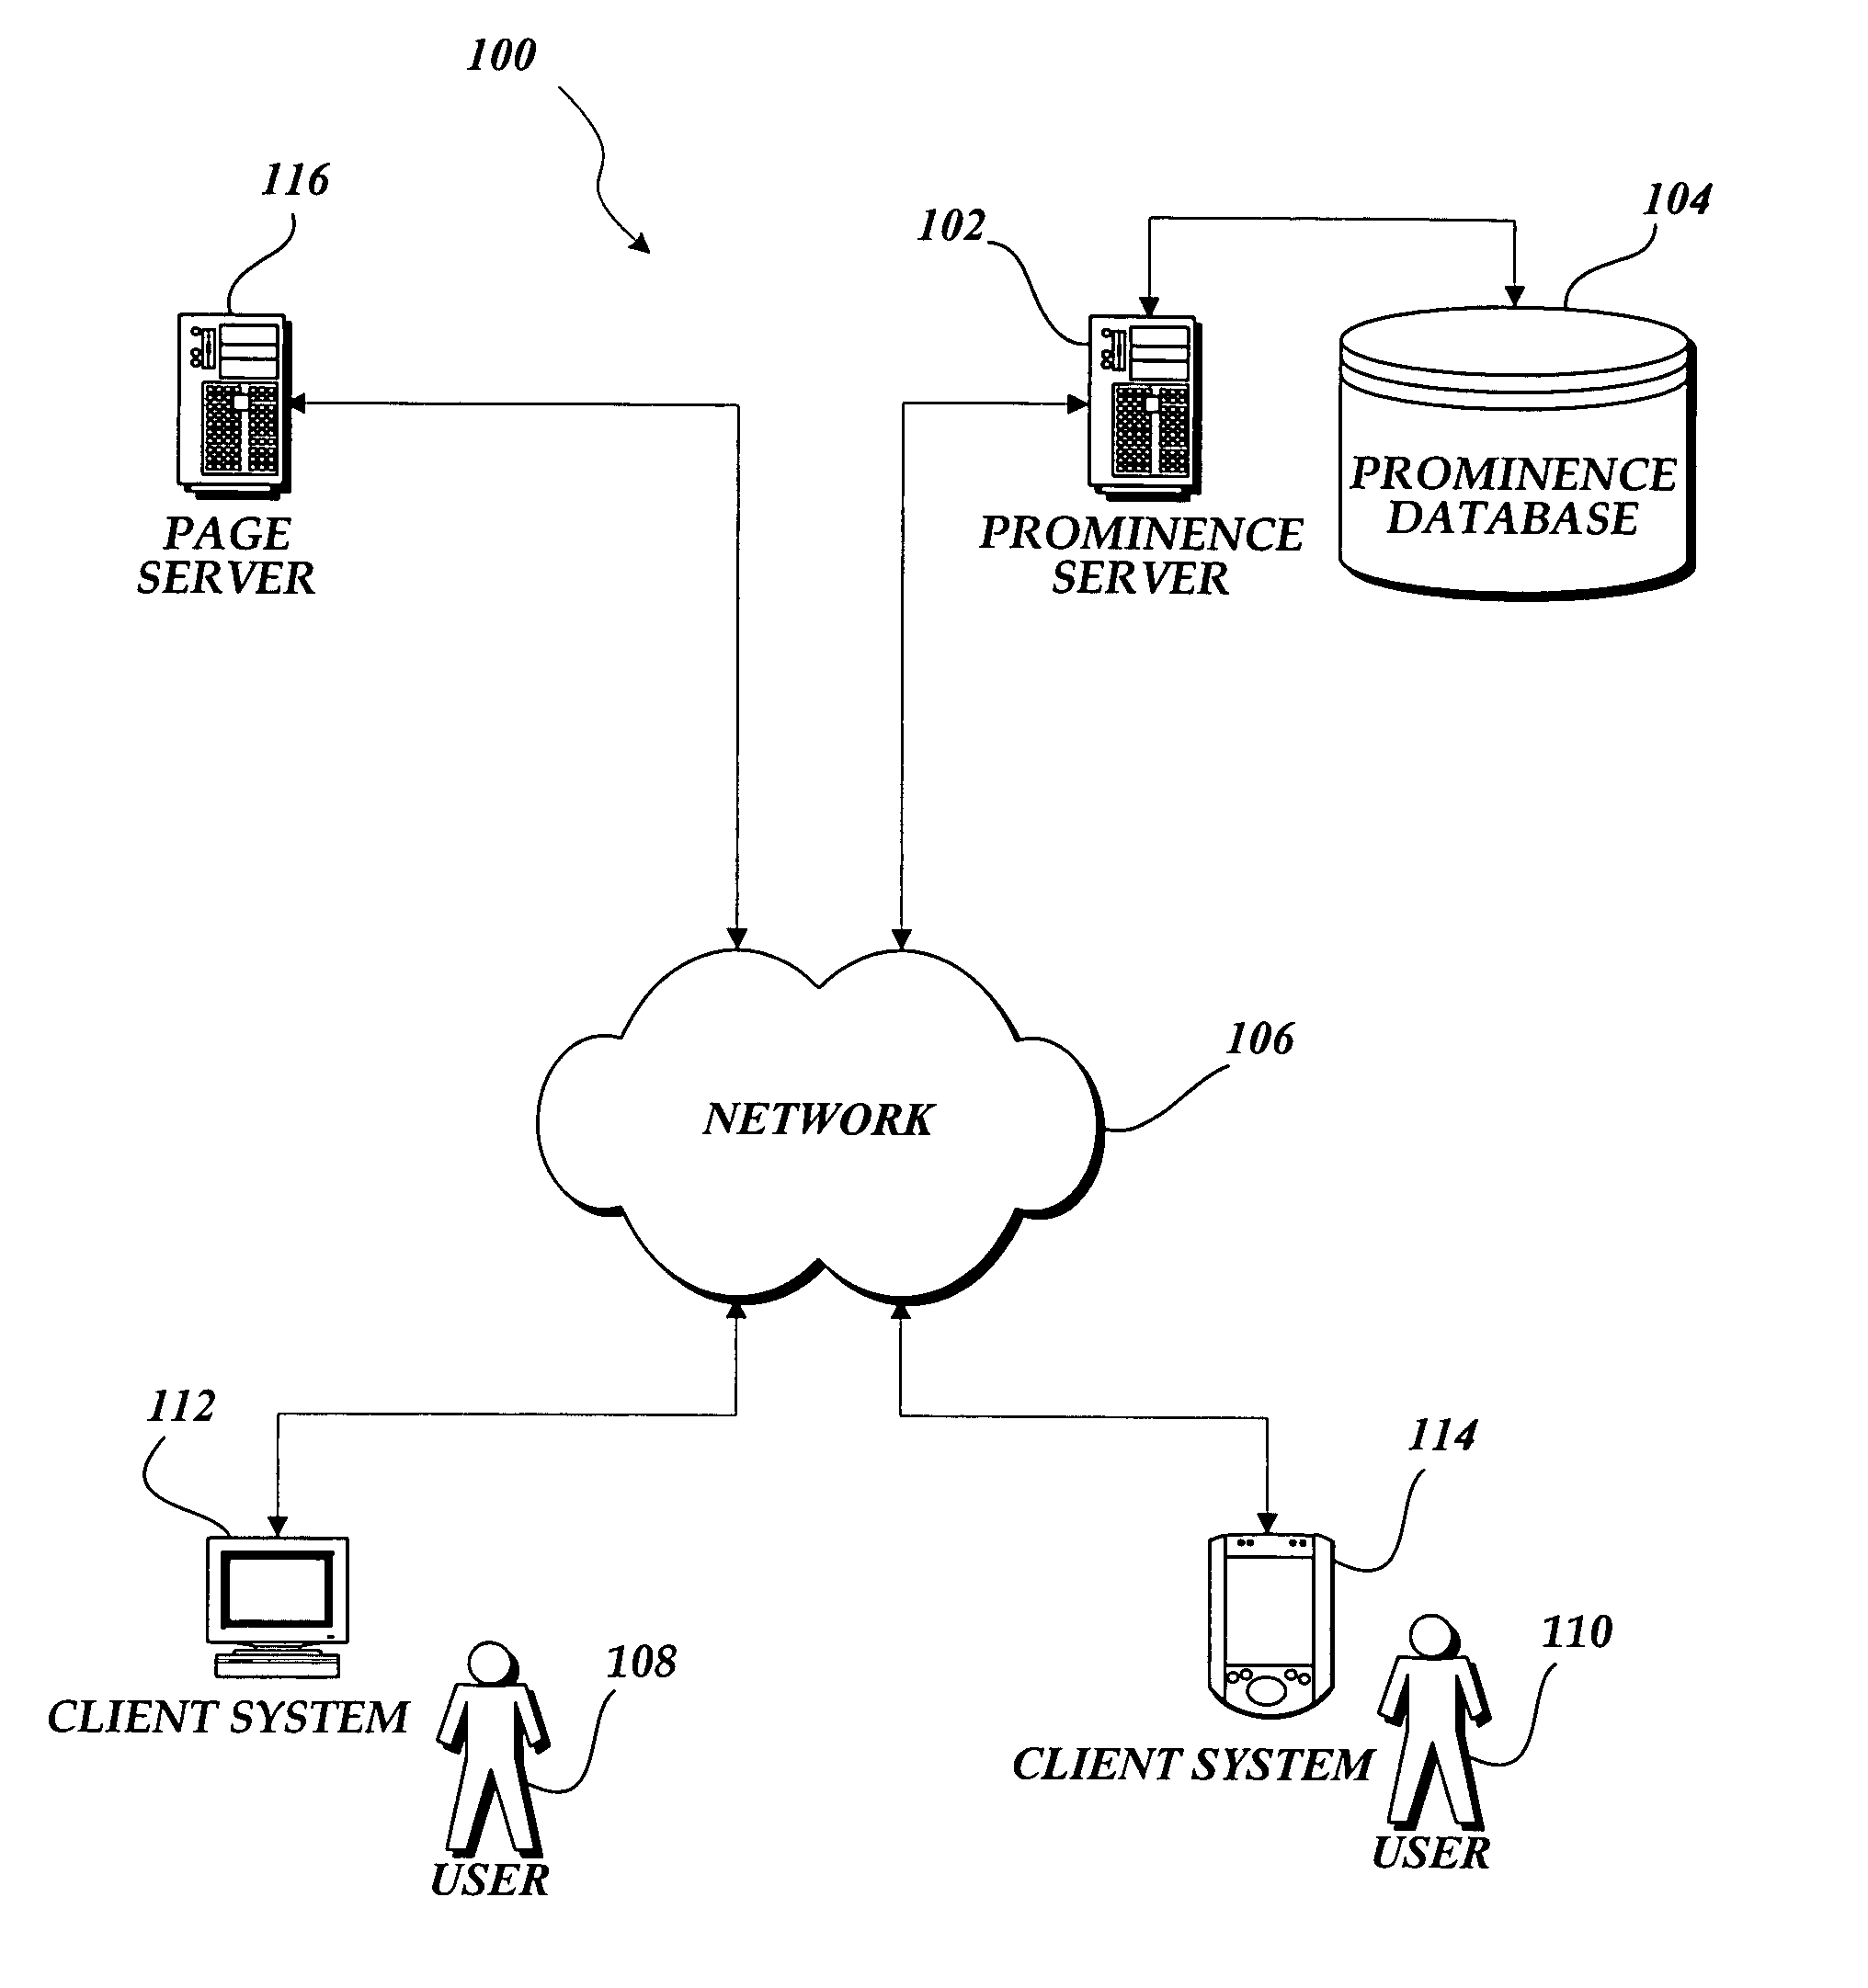 Method and system for displaying a hyperlink at multiple levels of prominence based on user interaction